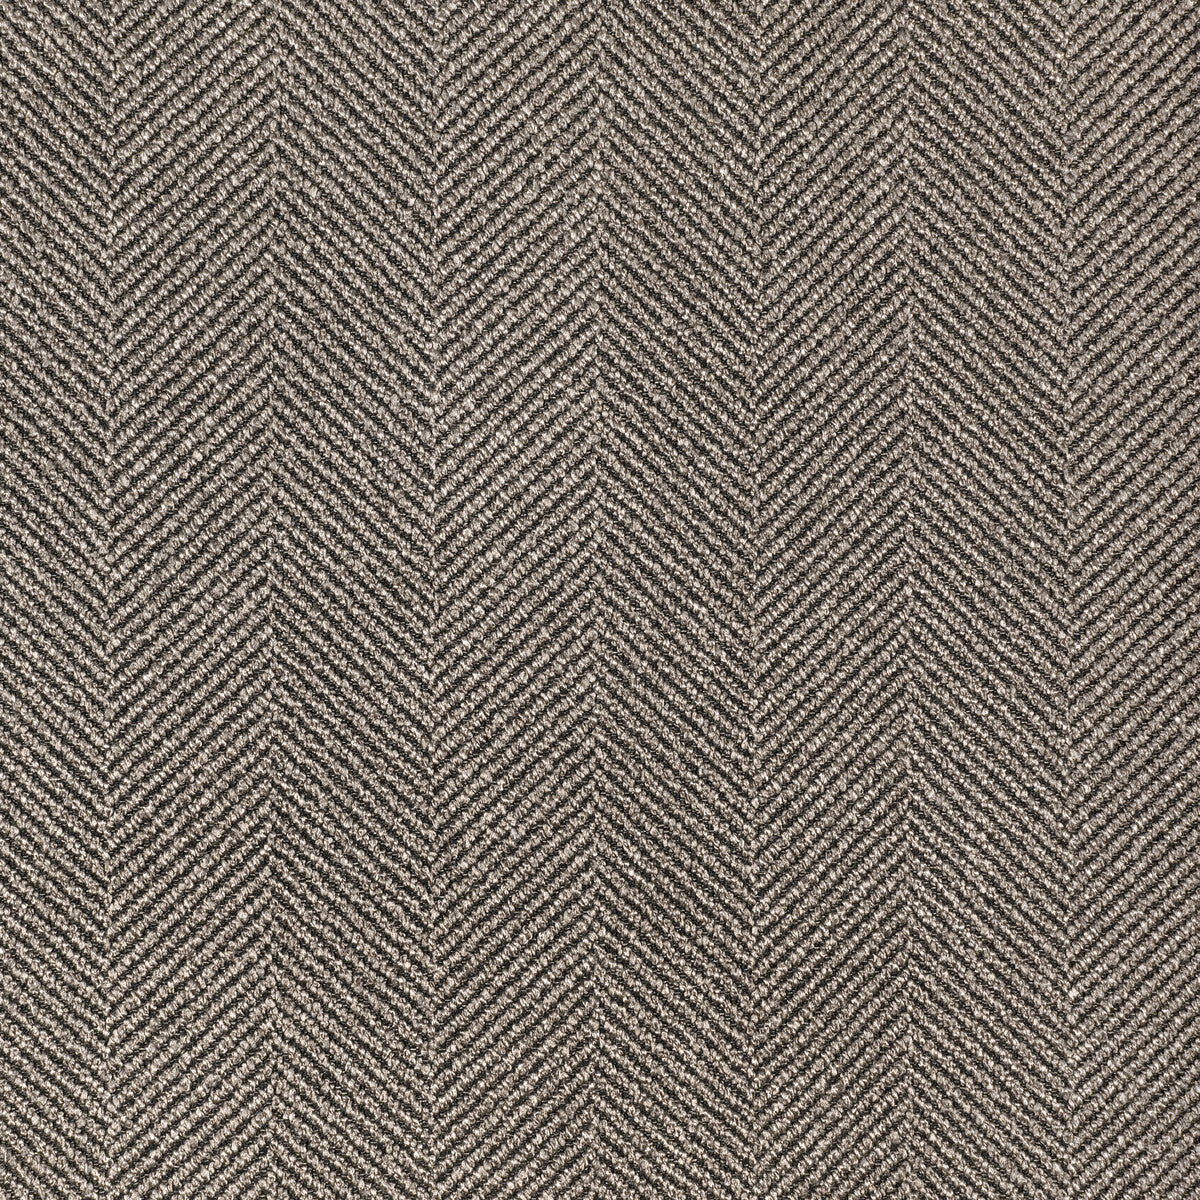 Reprise fabric in fog color - pattern 36568.21.0 - by Kravet Contract in the Seaqual collection